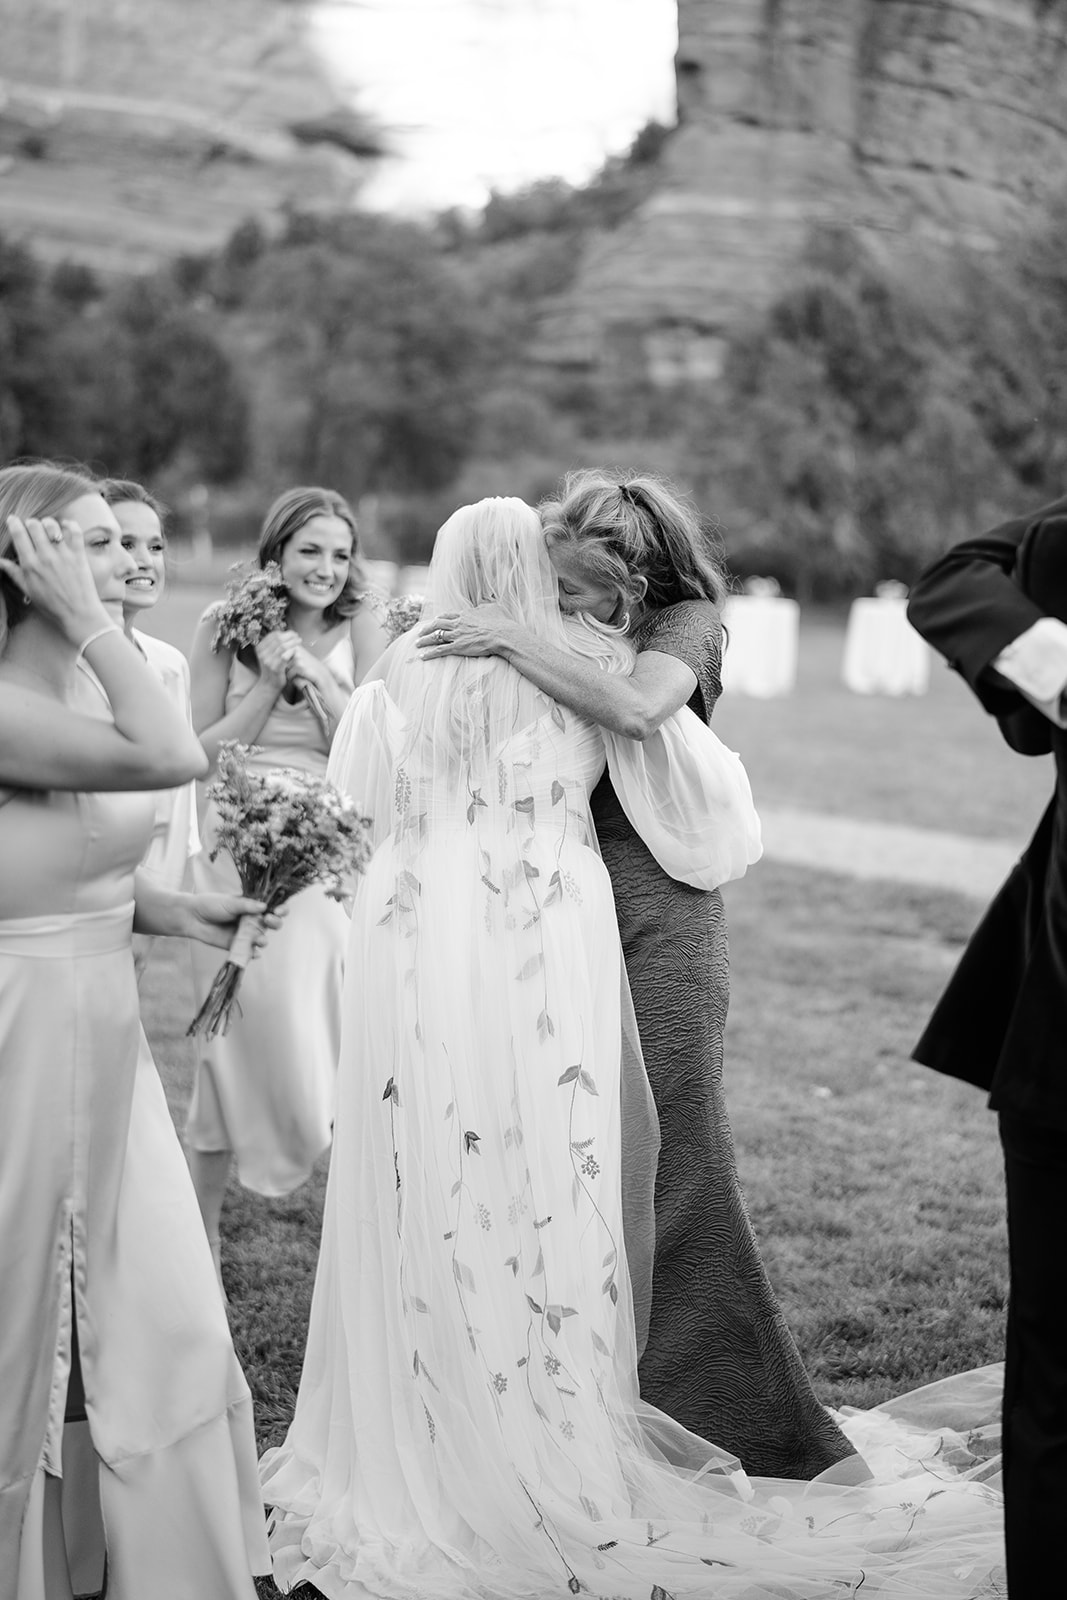 Bride with flower petals in her veil and woman hugging in black and white 